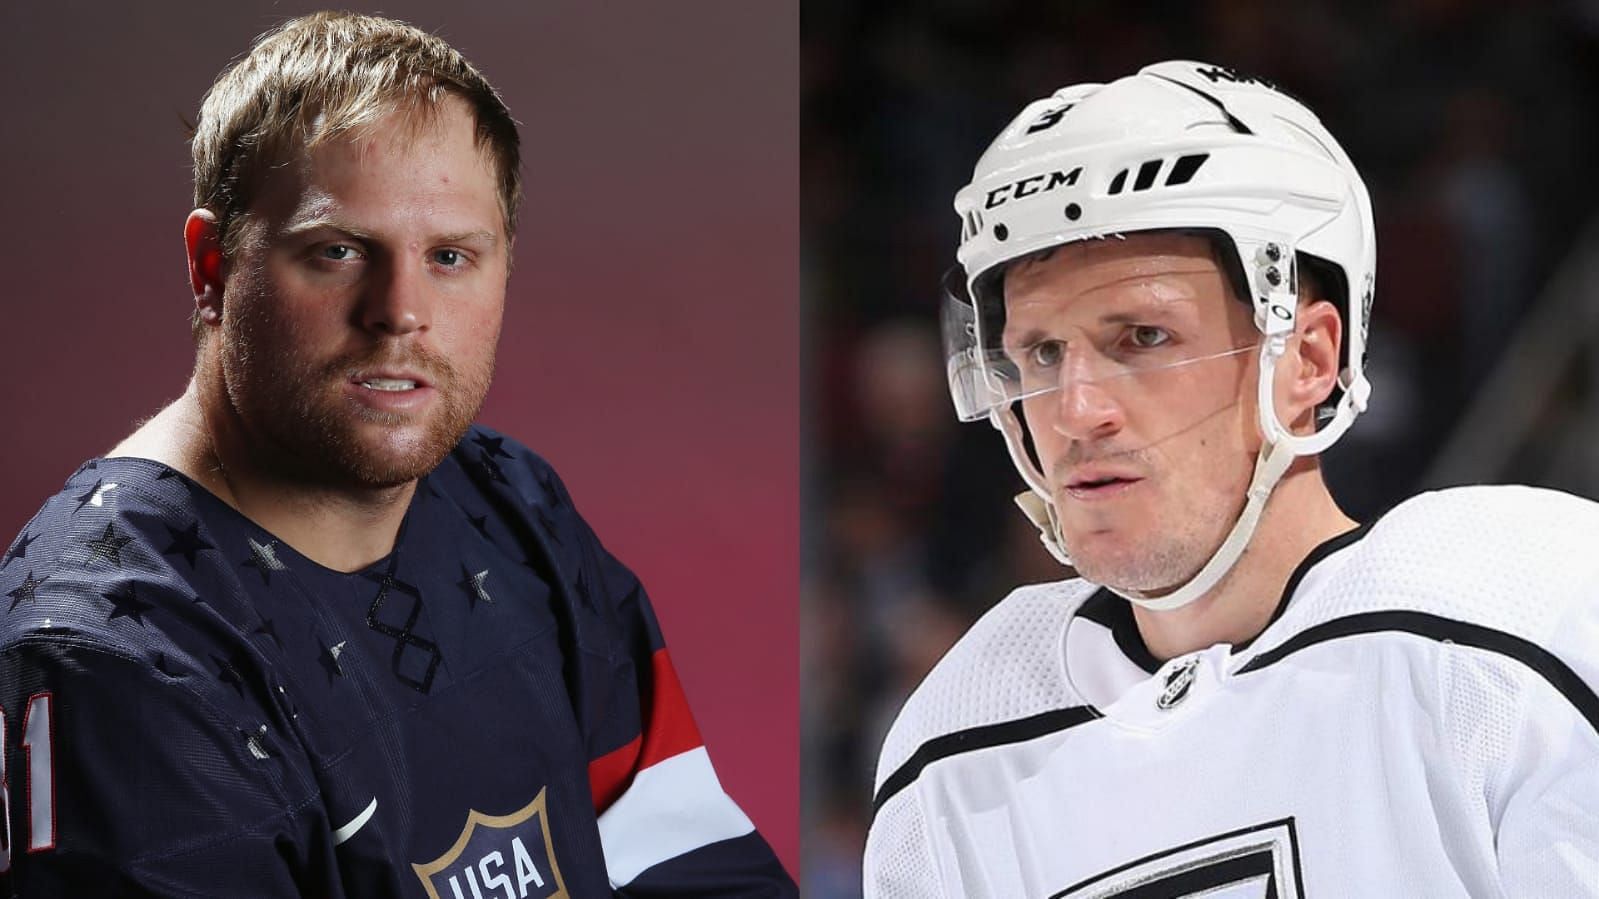 When Dion Phaneuf berated Phil Kessel for eating a cookie - &quot;You better get on a bike buddy&quot;